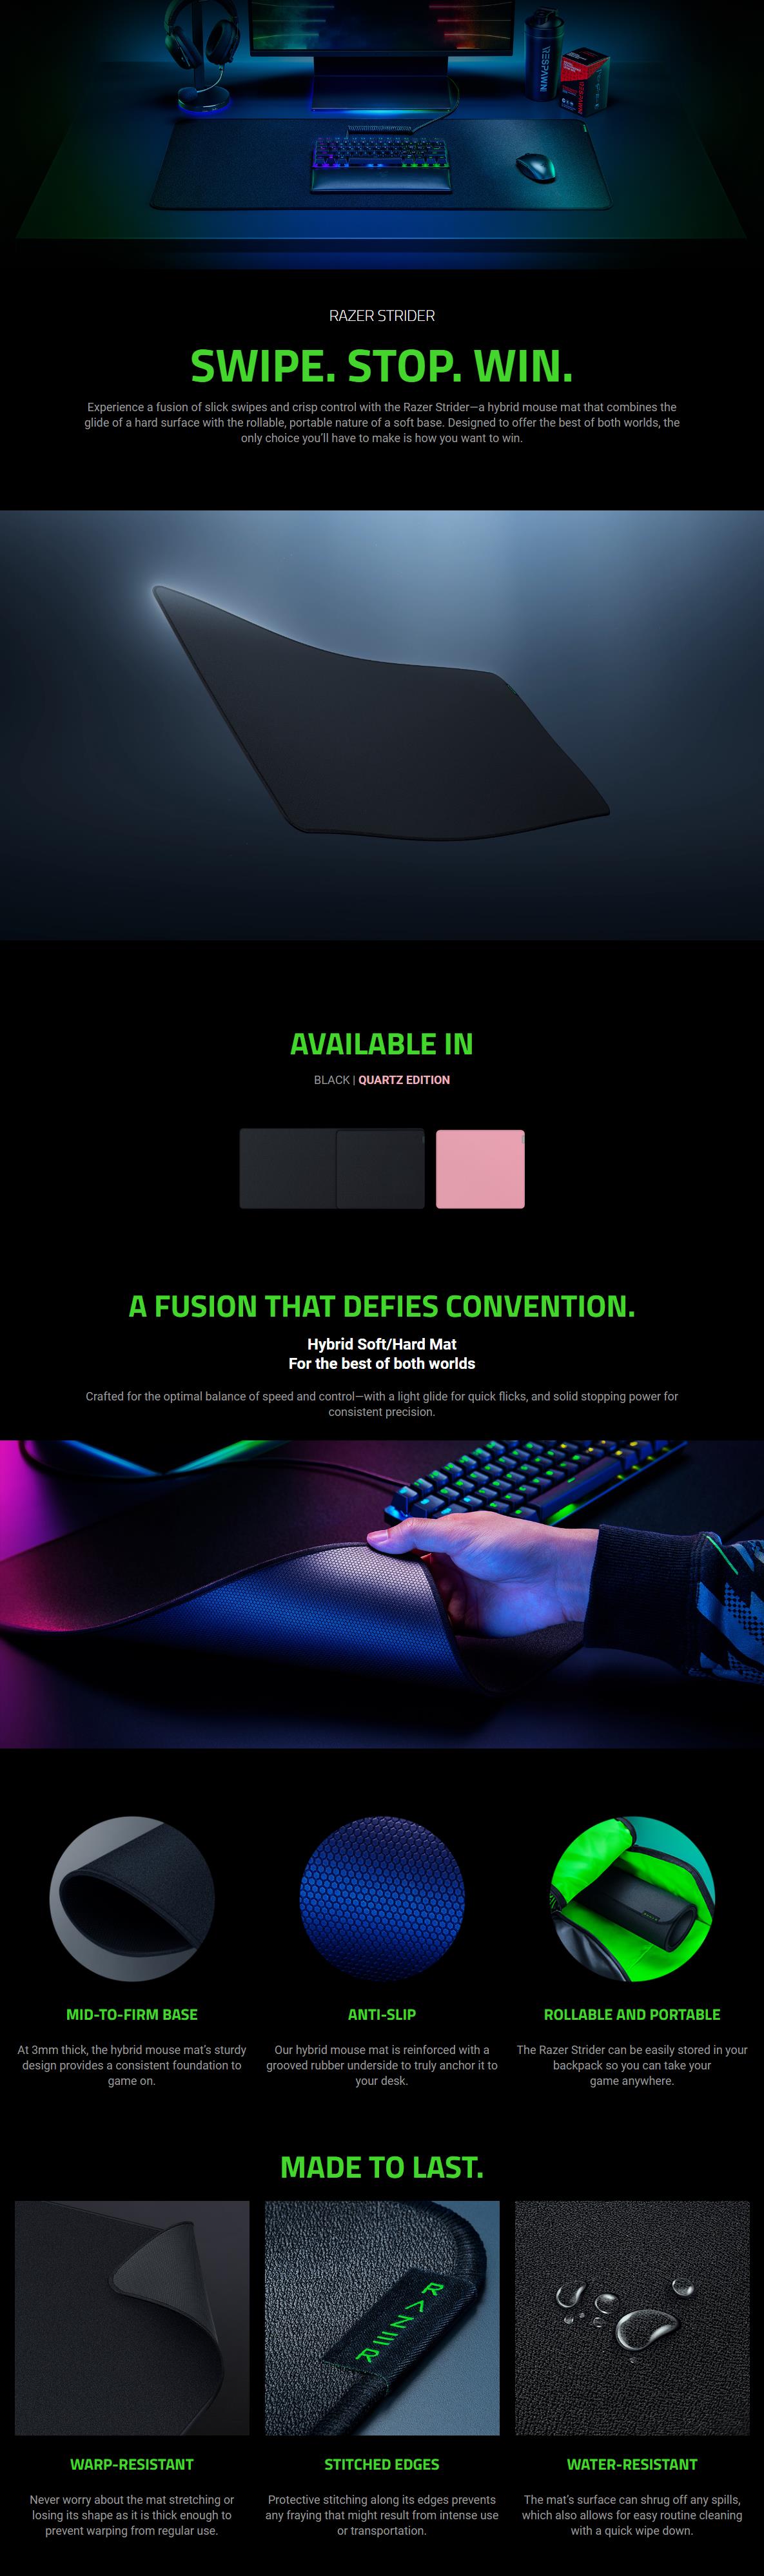 A large marketing image providing additional information about the product Razer Strider - Hybrid Gaming Mouse Mat (Large, Quartz Pink) - Additional alt info not provided